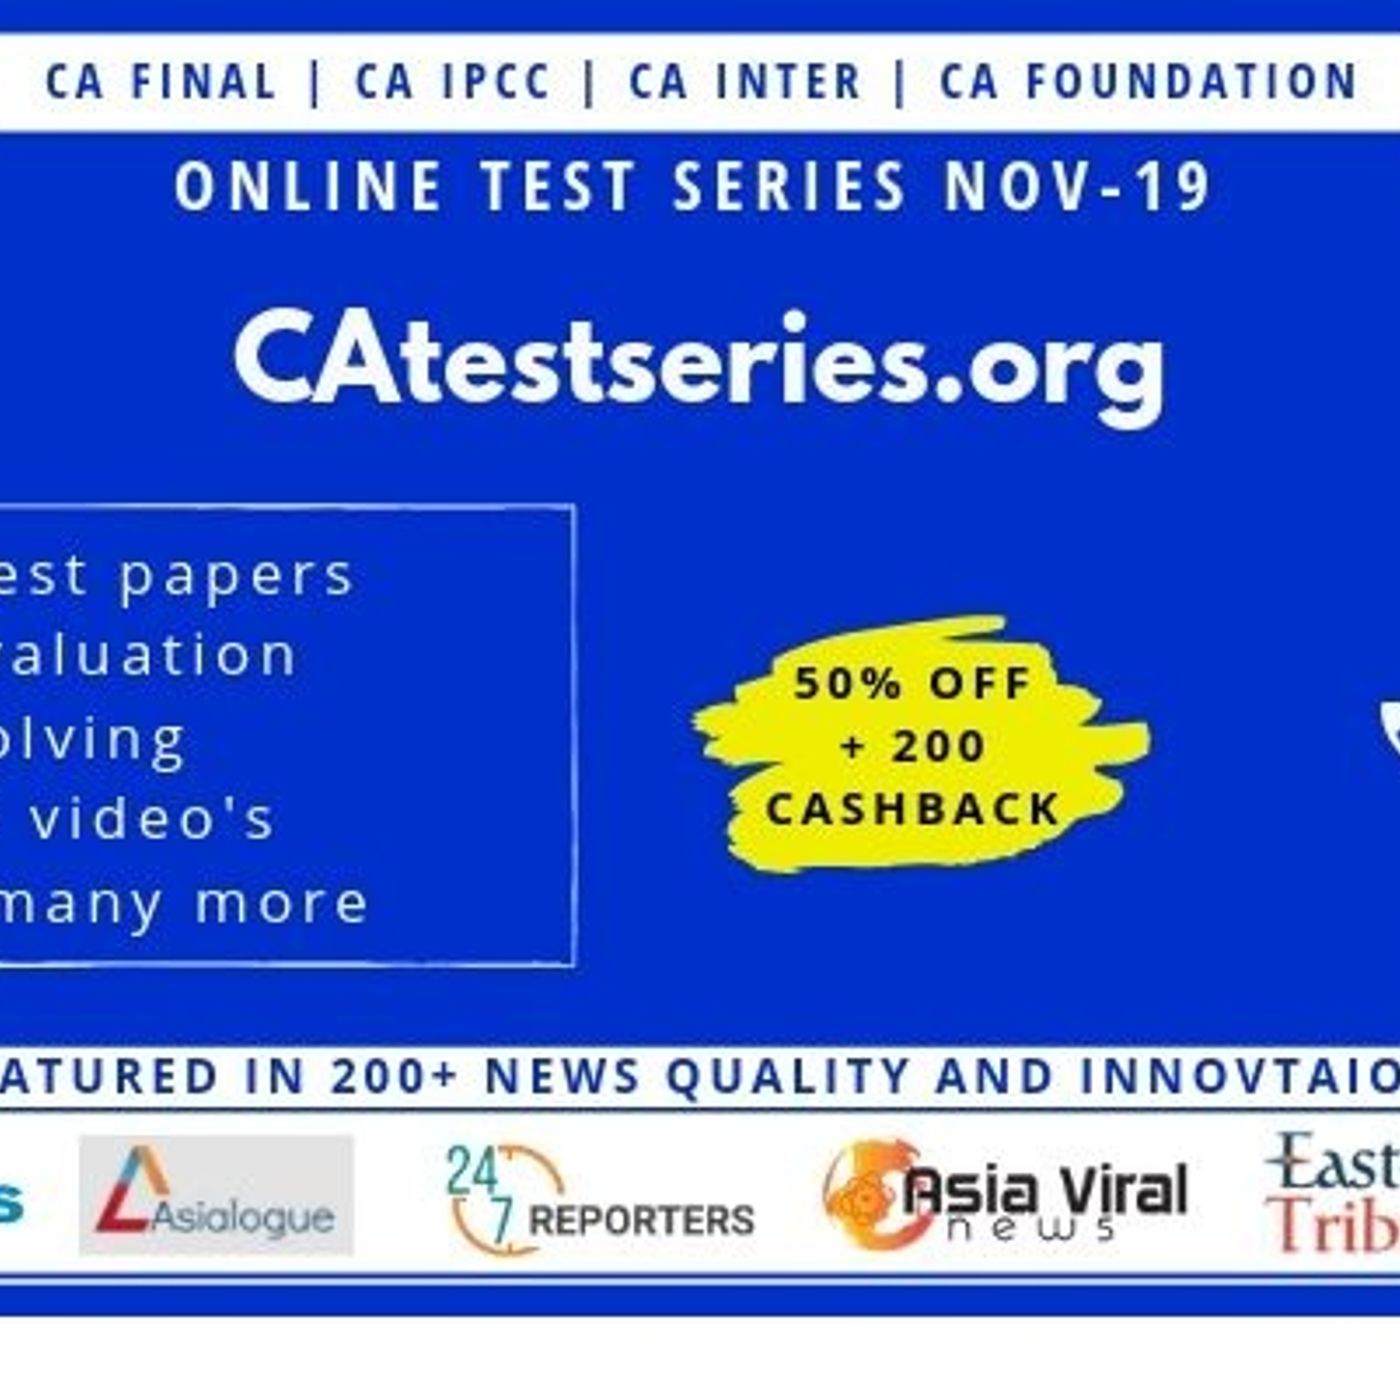 How CA Online Test Series Help Students to Get Ready for CA Final Examination?